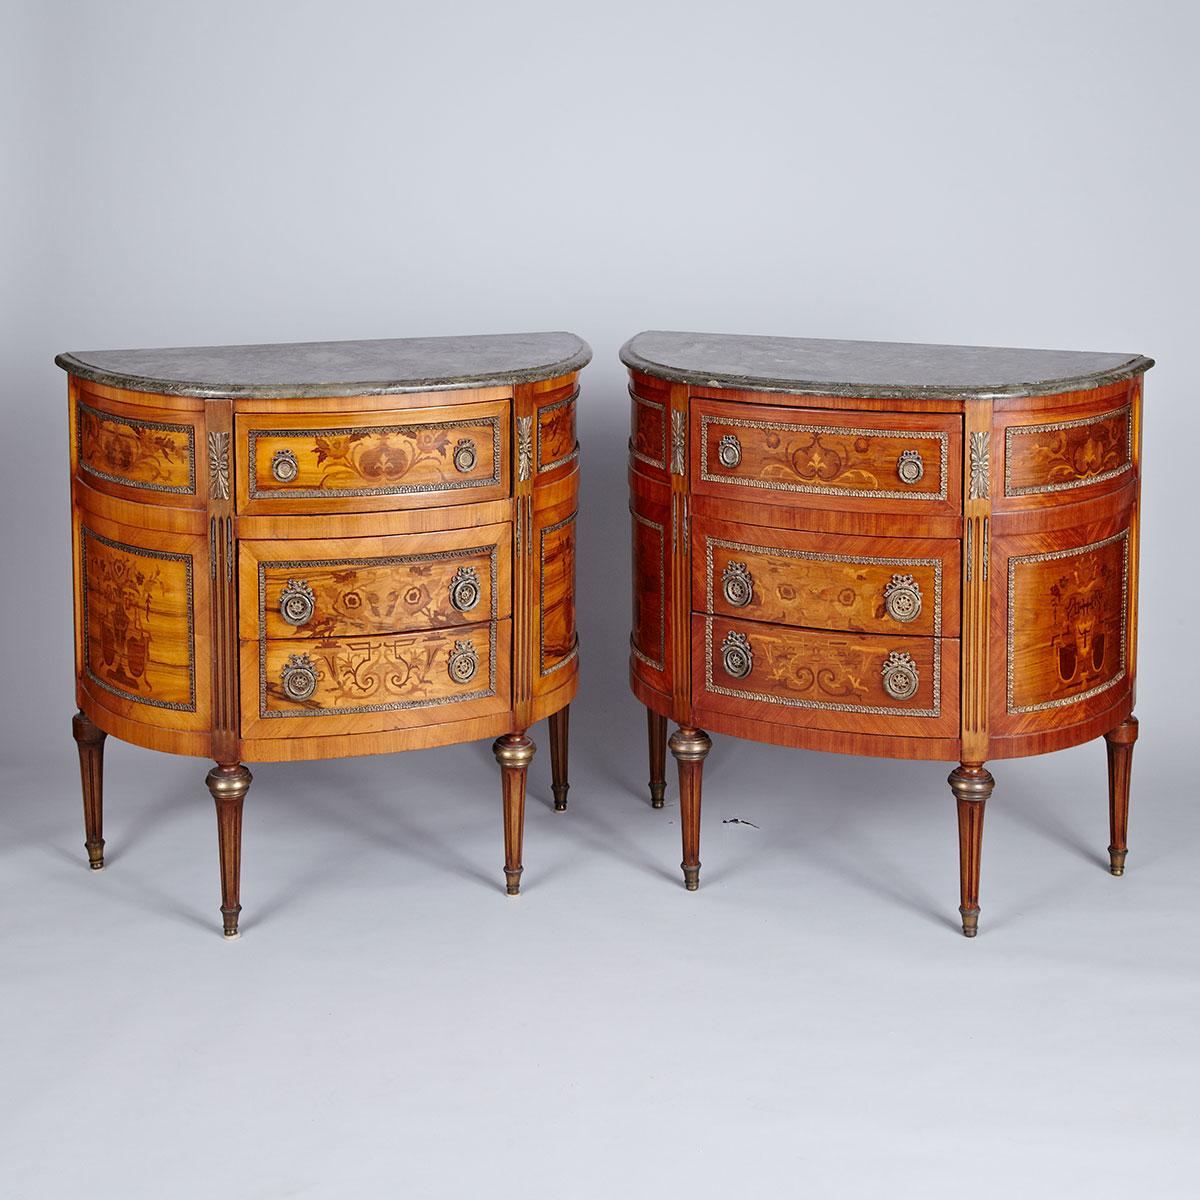 Pair of Louis XVI Style Ormolu Mounted Marquetry Demi-Lune Commodes, early 20th century